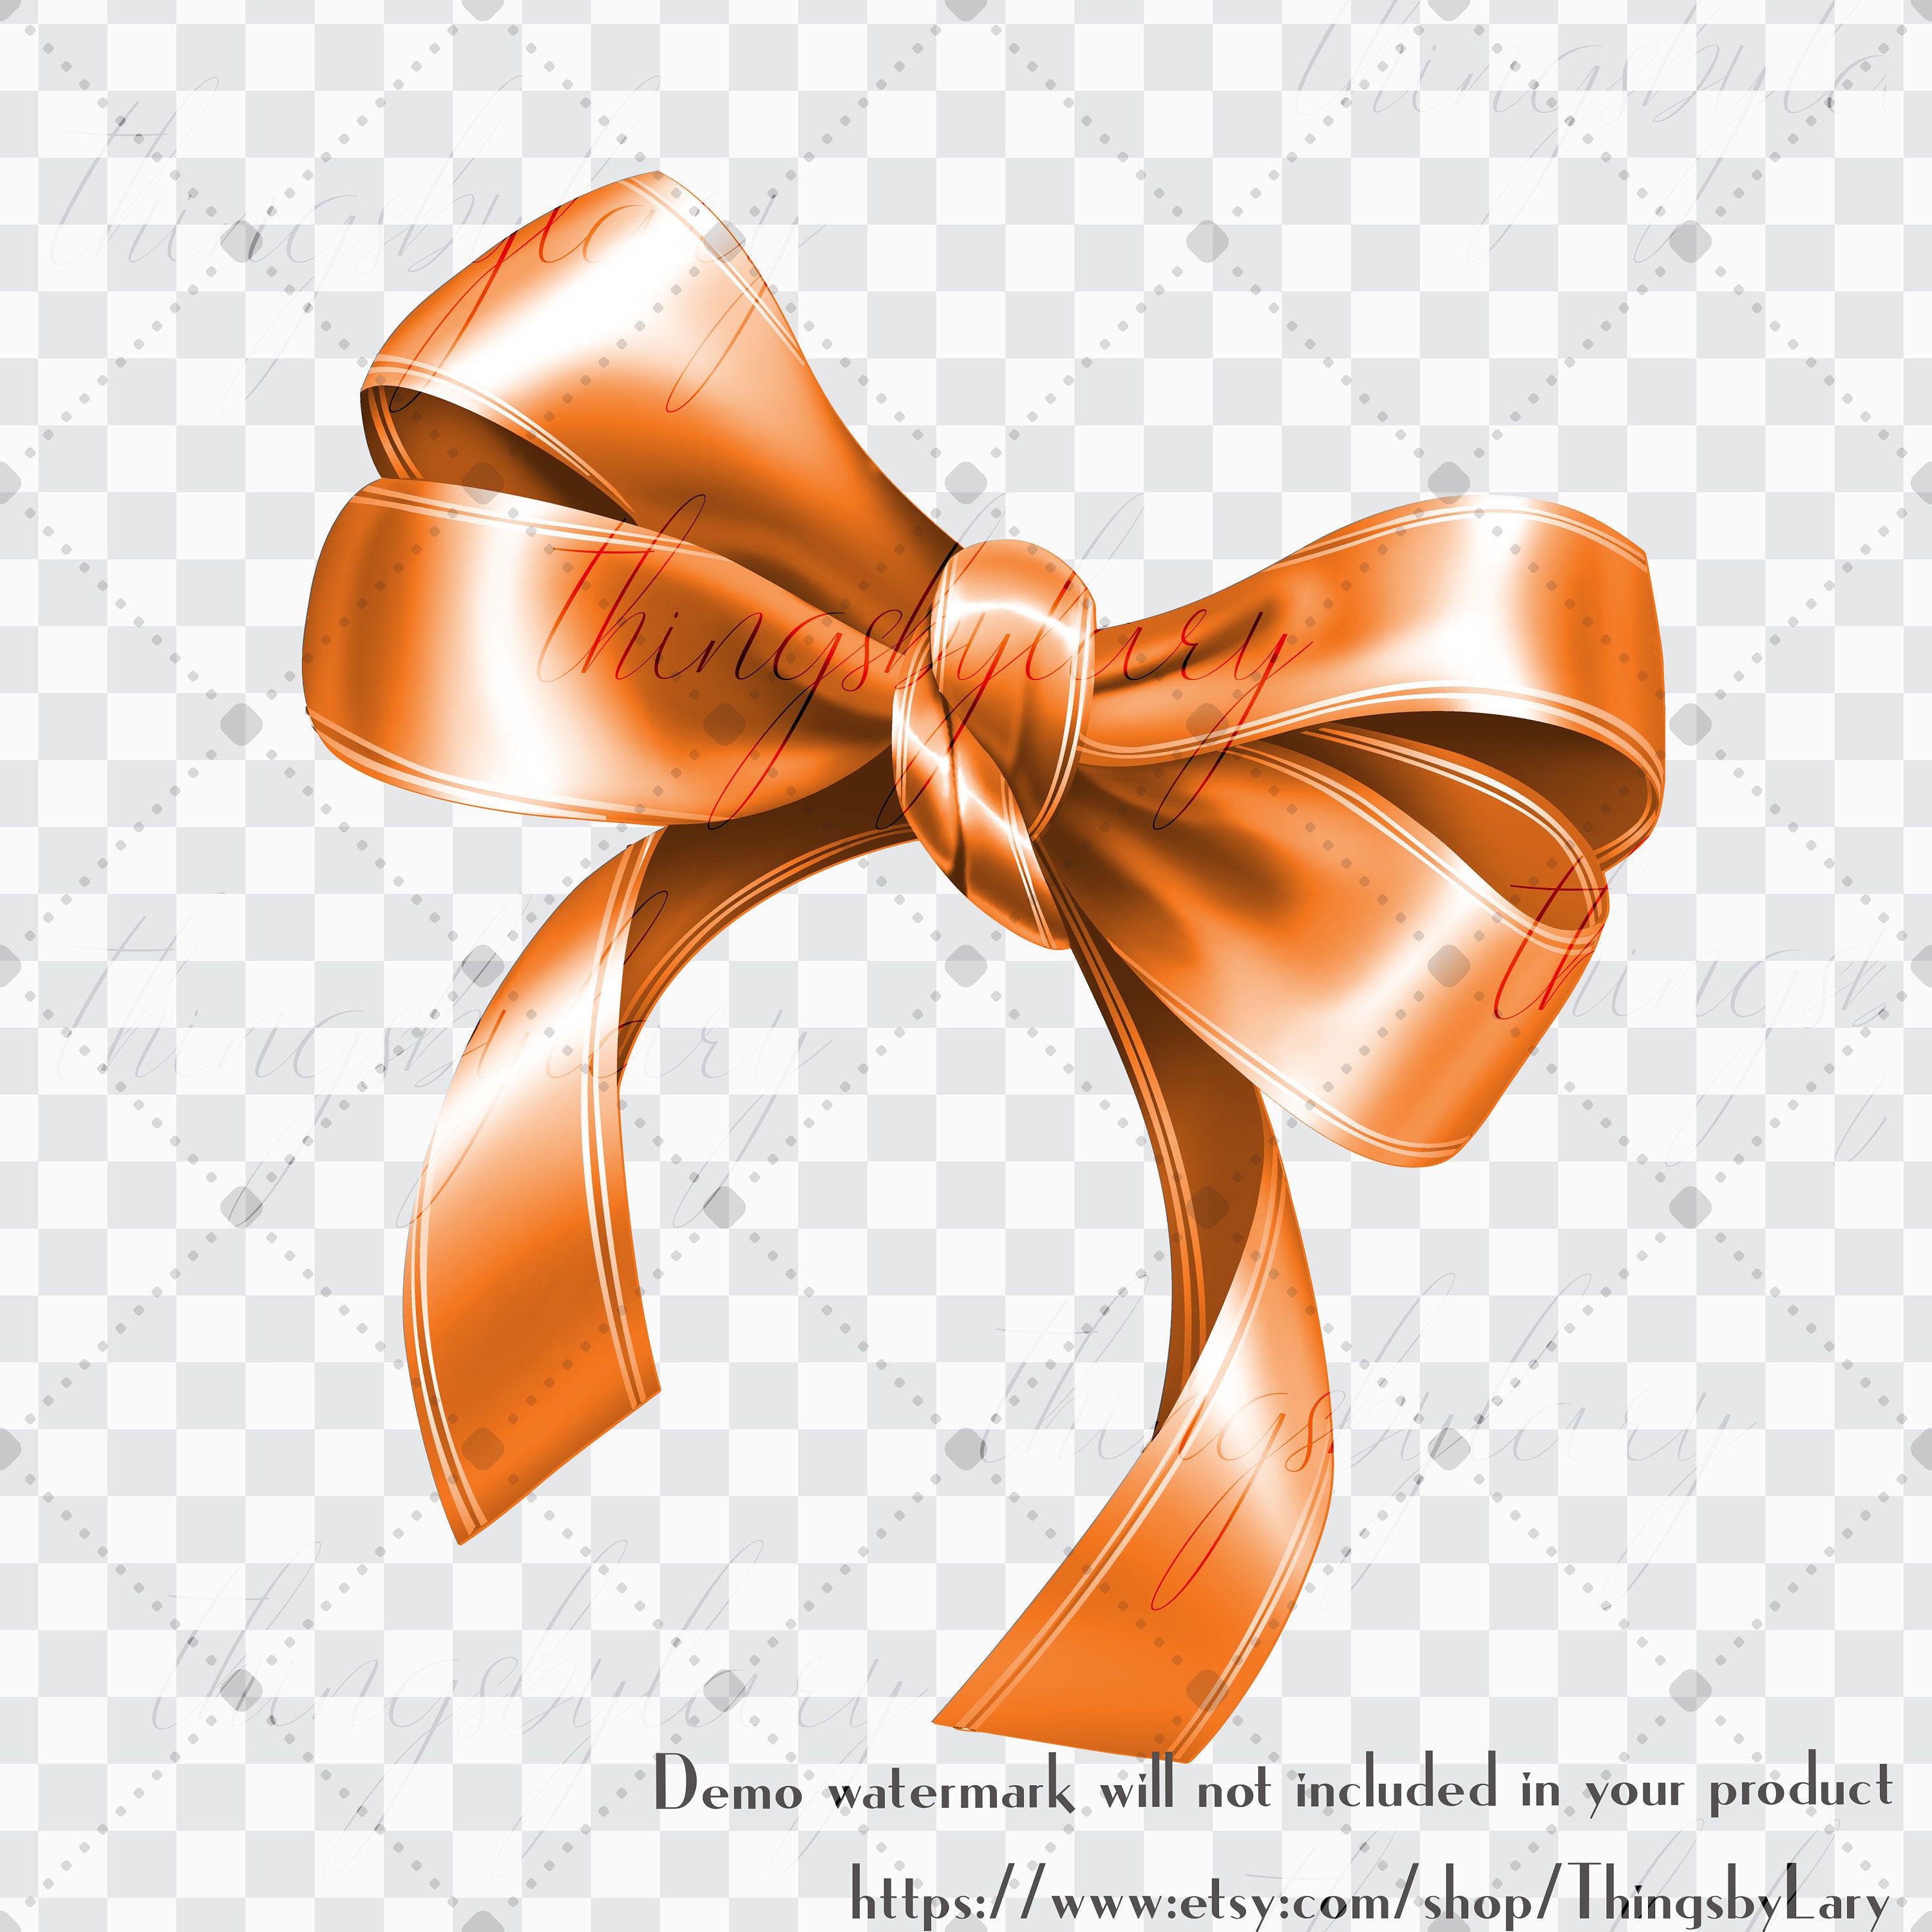 56 Halloween Bows and Ribbons Cliparts, 300 Dpi, Instant Download, Commercial Use, Halloween Gift, Digital Satin Bows, Halloween Invitation